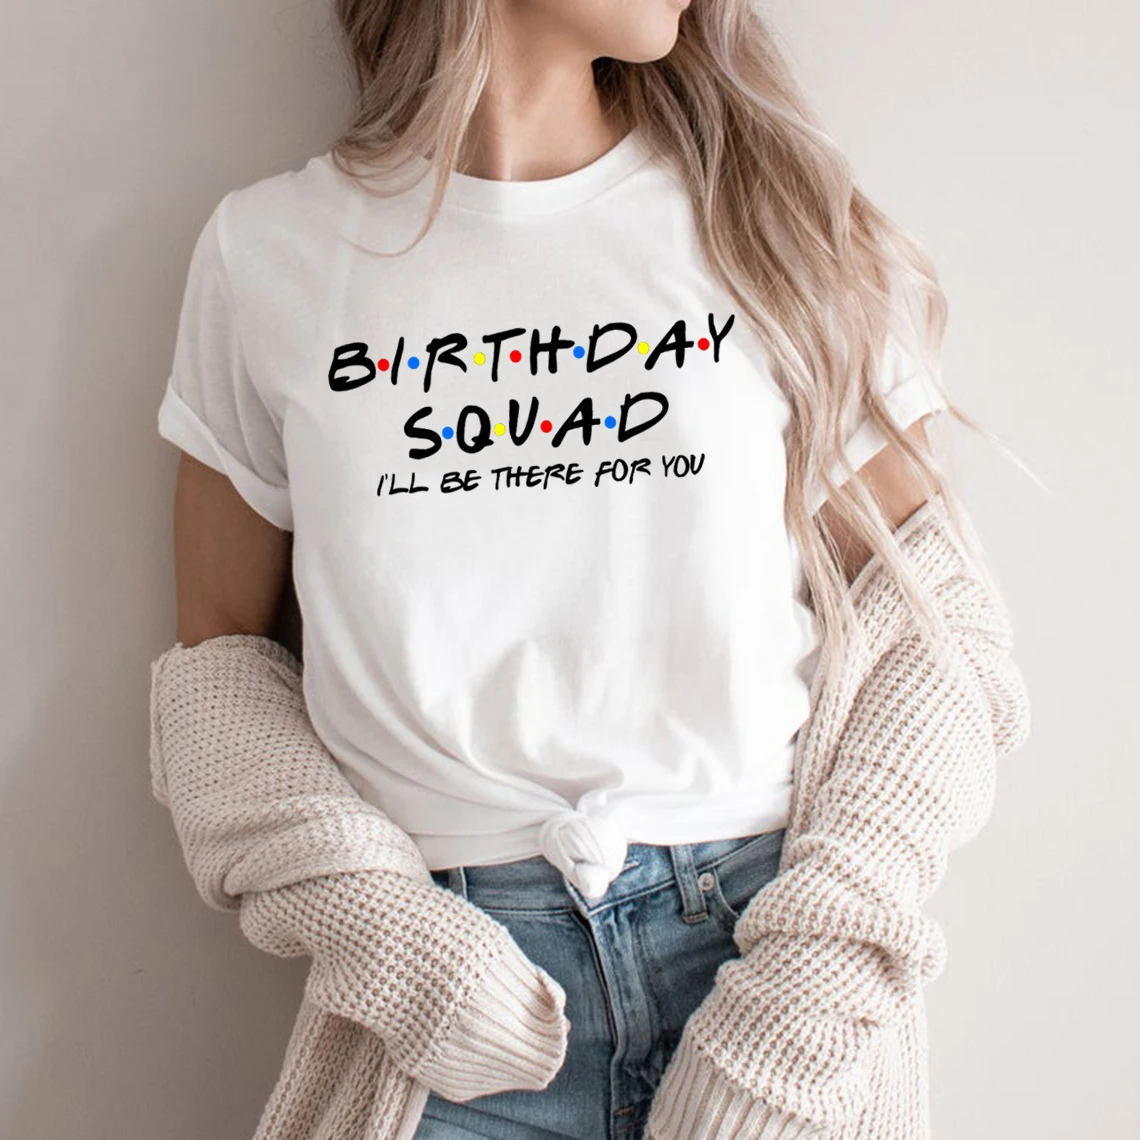 

Birthday Squad Shirt I'll Be There for You T-shirt Friends Shirts Gift for Birthday Unisex Graphic T Shirts Casual Tops